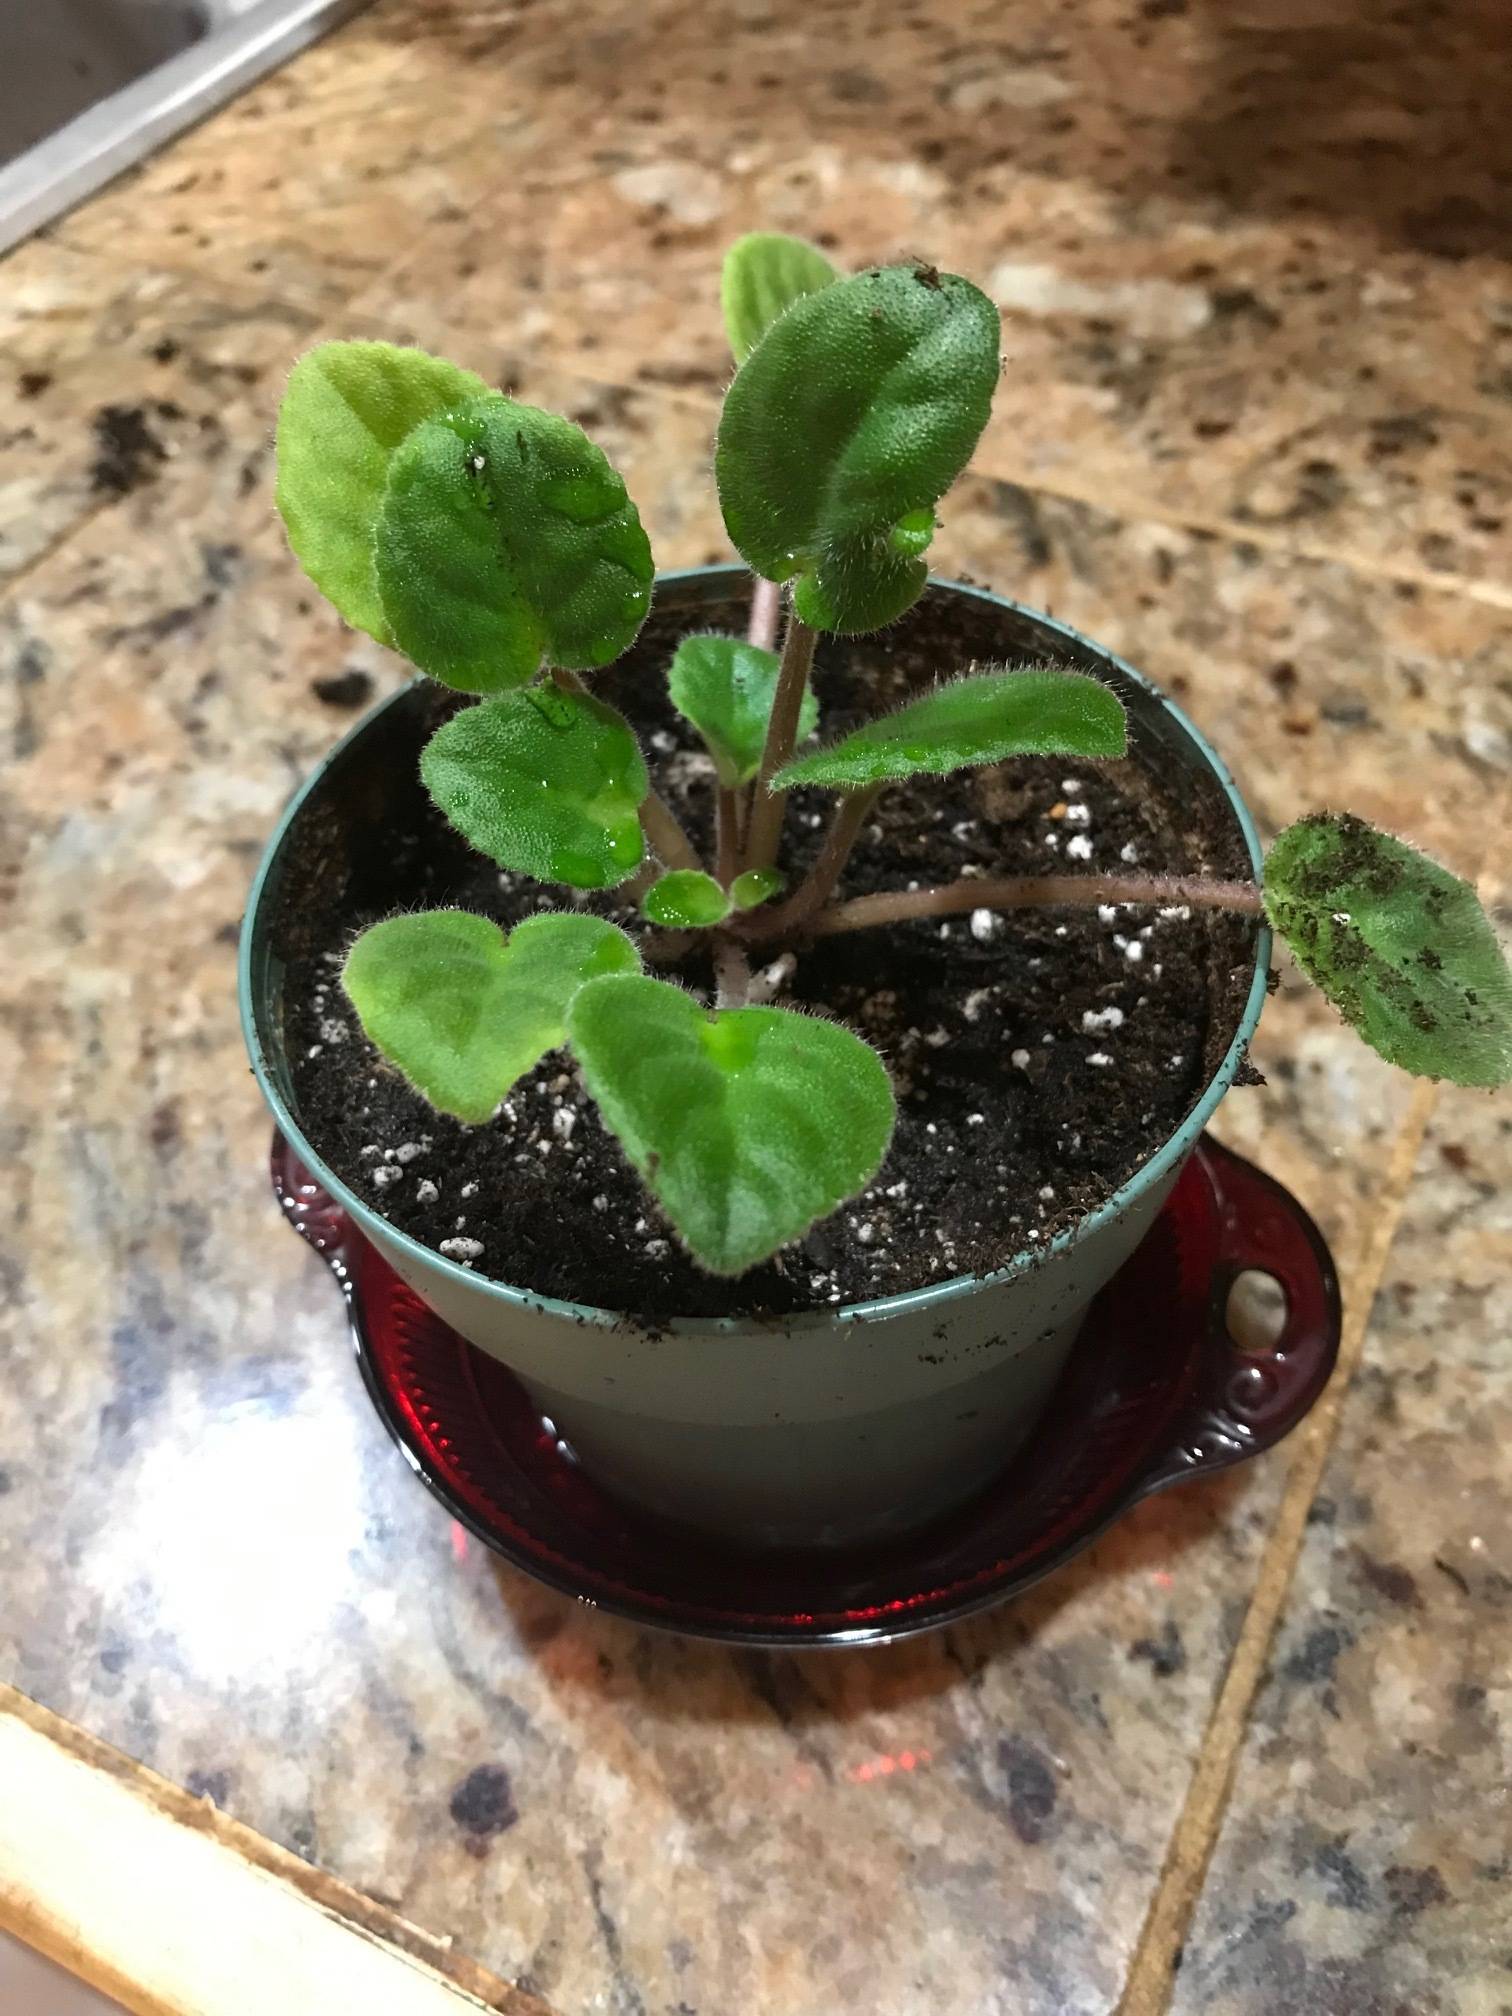 Here a separated African violet has a new home in its own pot, as seen at Rosemary Fitzpatrick’s home in Homer, Alaska, on Jan. 27, 2019. (Photo by Rosemary Fitzpatrick)